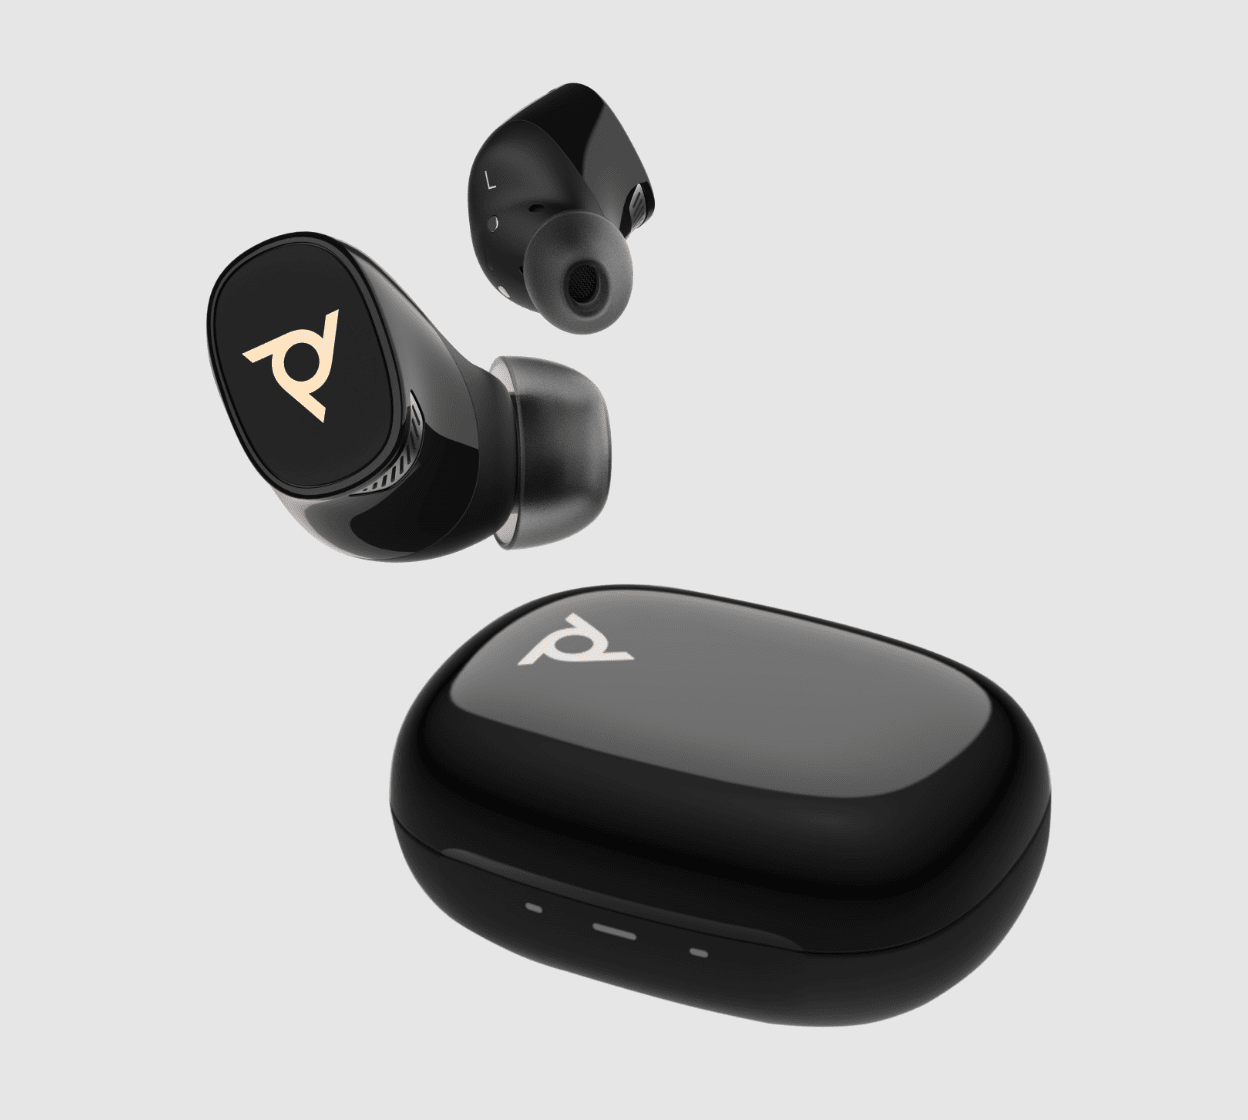 https://www.hp.com/content/dam/sites/worldwide/poly/headsets/bluetooth-headsets-and-earbuds/VCS-Desktop%E2%80%933@2x.png